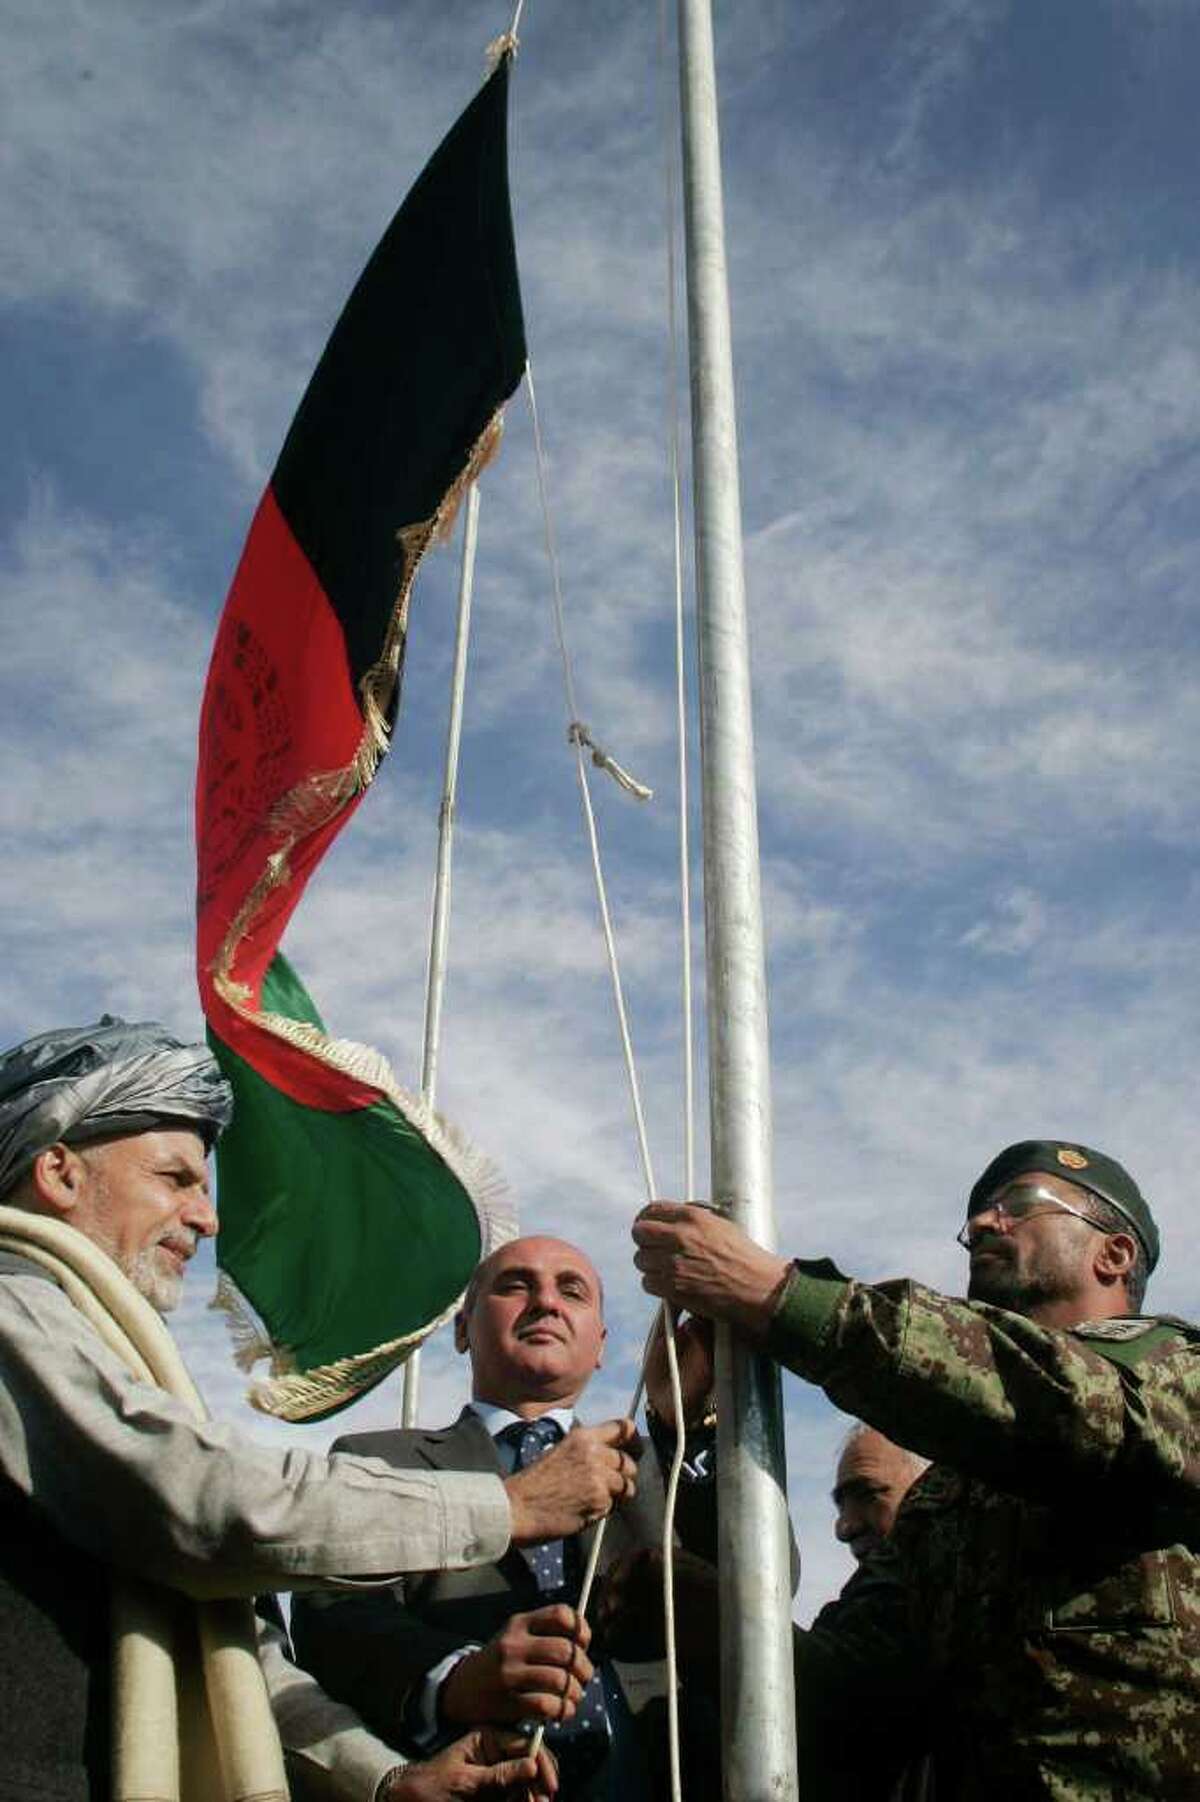 Ashraf Ghani Ahmadzai, left, head of the Transition Commission, raises the Afghanistan flag during the transfer of authority from NATO troops to Afghan security forces in Chaghcharan, Ghor province, west of Kabul, Afghanistan, Wednesday, Jan. 4, 2012. The security responsibilities of Chaghcharan, the provincial capital of Ghor province is handed over from the NATO forces to Afghan security forces. The process of taking over security from over 130,000-strong NATO-led ISAF forces by Afghan troops would be completed by the end of 2014 when Afghanistan will take over the full leadership of its own security duties from U.S. and NATO forces. (AP Photo/Hoshang Hashimi)